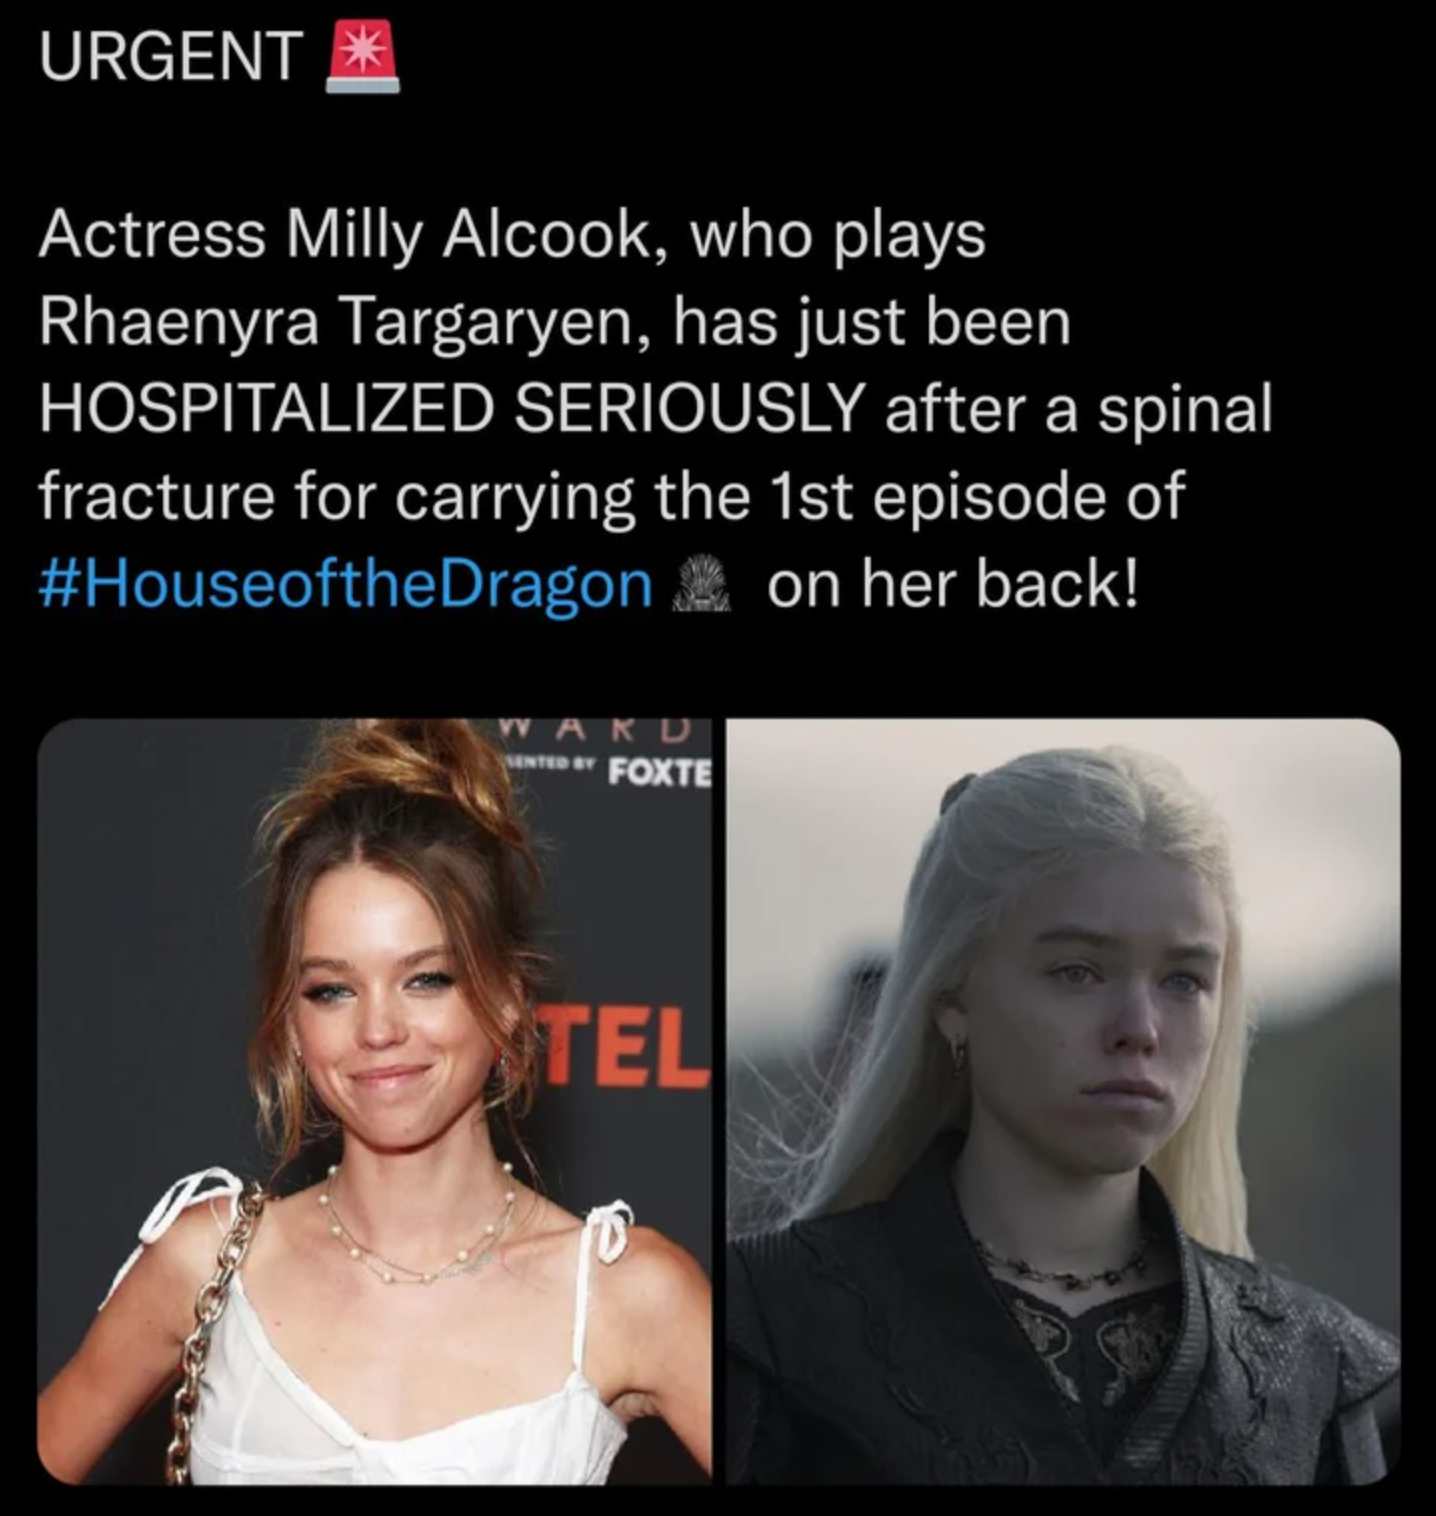 photo caption - Urgent Actress Milly Alcook, who plays Rhaenyra Targaryen, has just been Hospitalized Seriously after a spinal fracture for carrying the 1st episode of Dragon on her back! Aku Foxte Tel